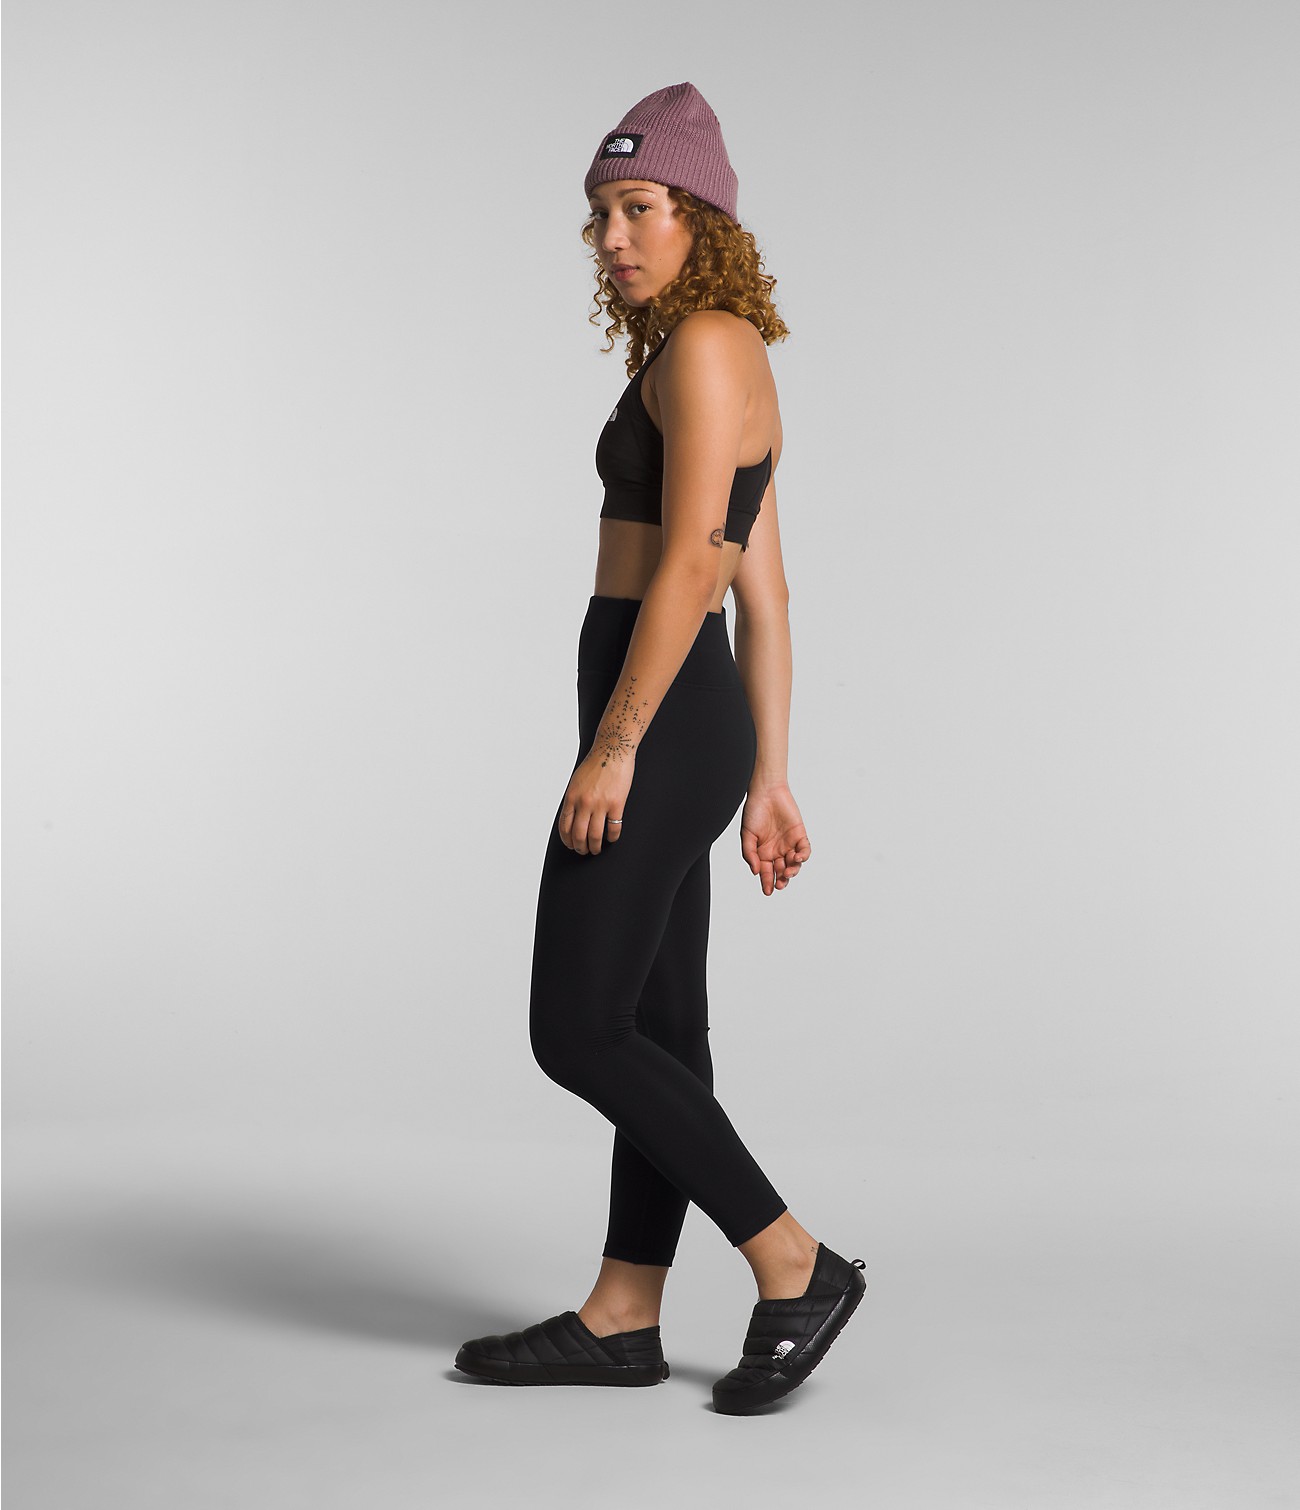 Women’s FD Pro 160 Tights | The North Face